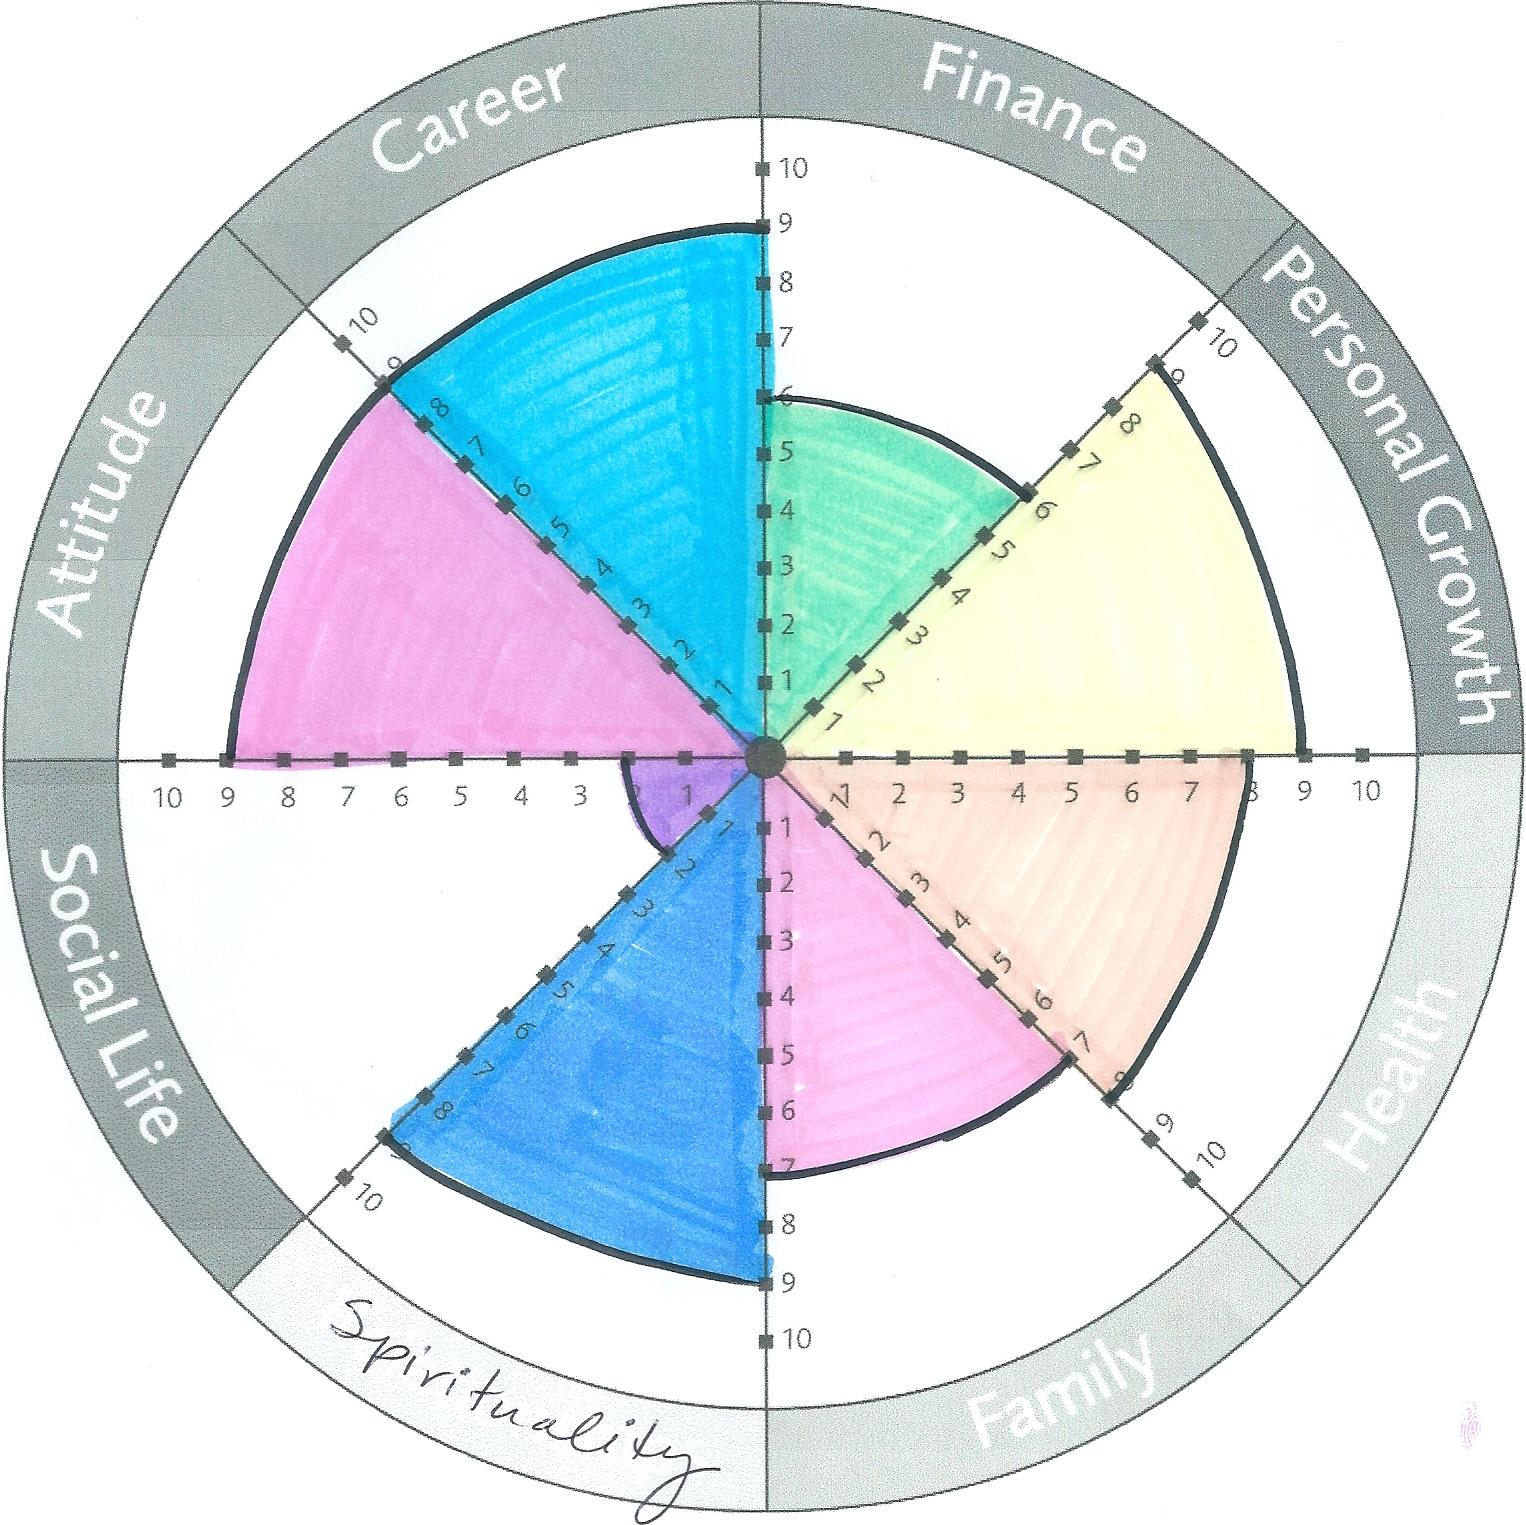 What Does Your Wheel of Life Look Life?